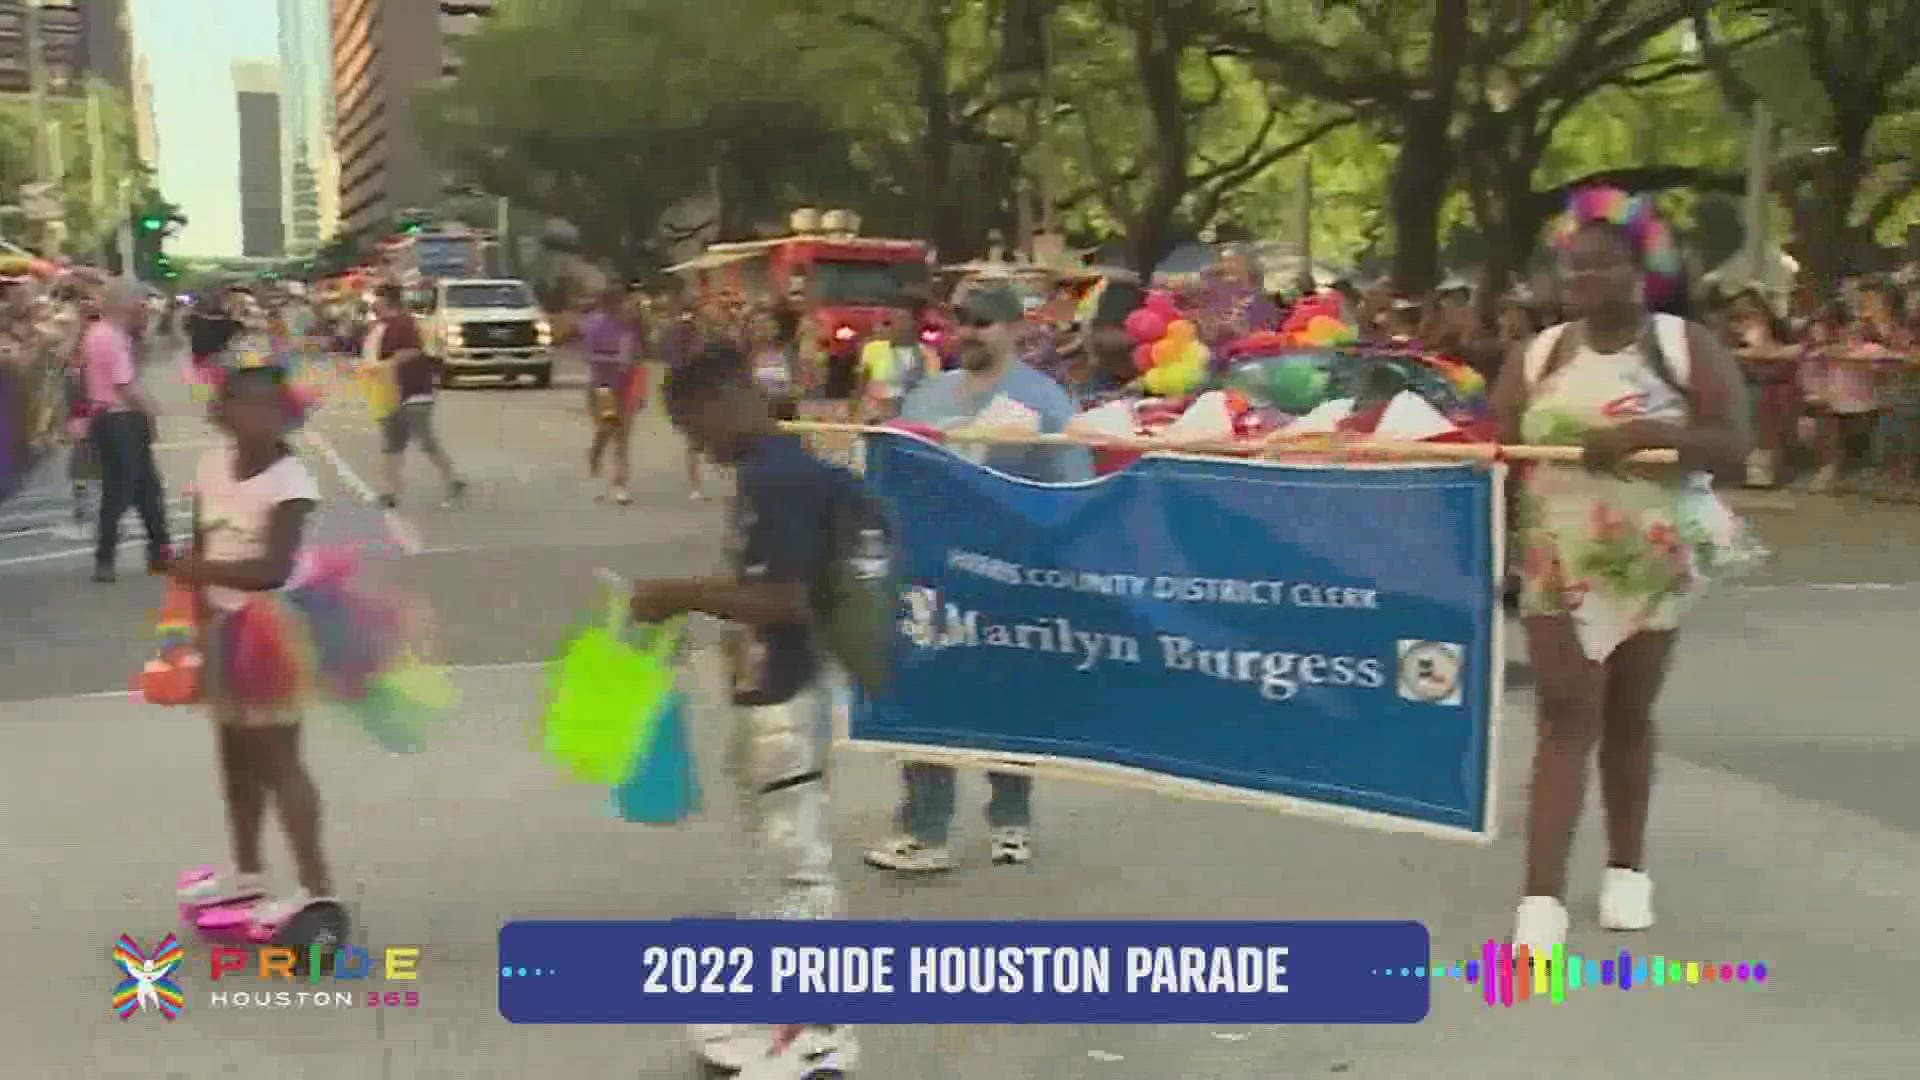 The Pride Houston 365 Festival and Parade returned after a two-year absence.